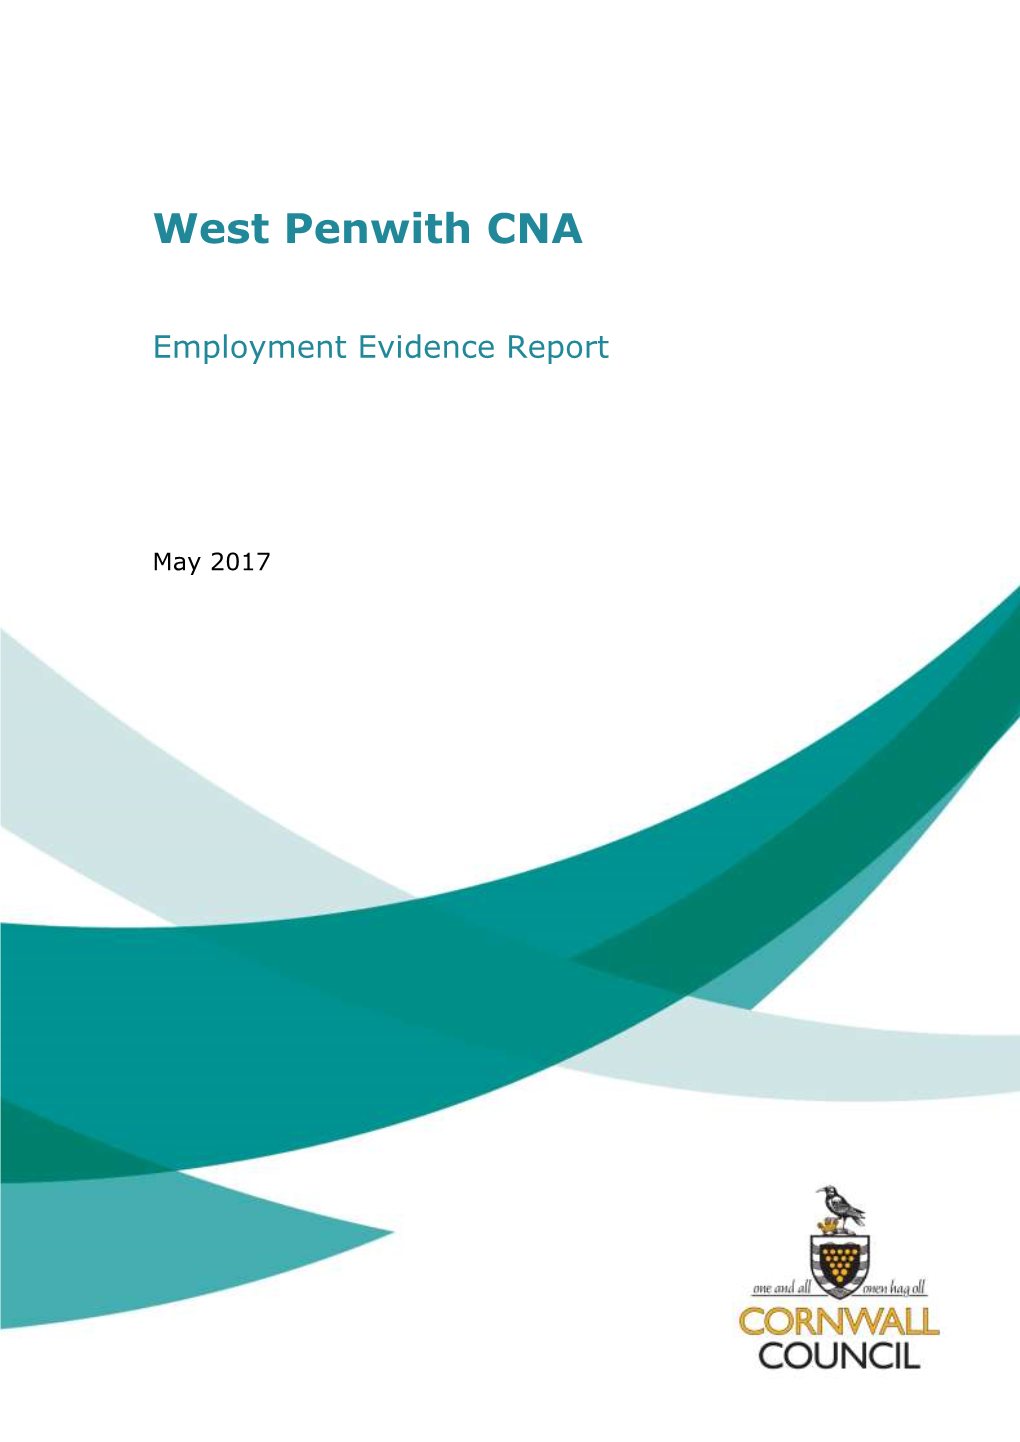 West Penwith CNA